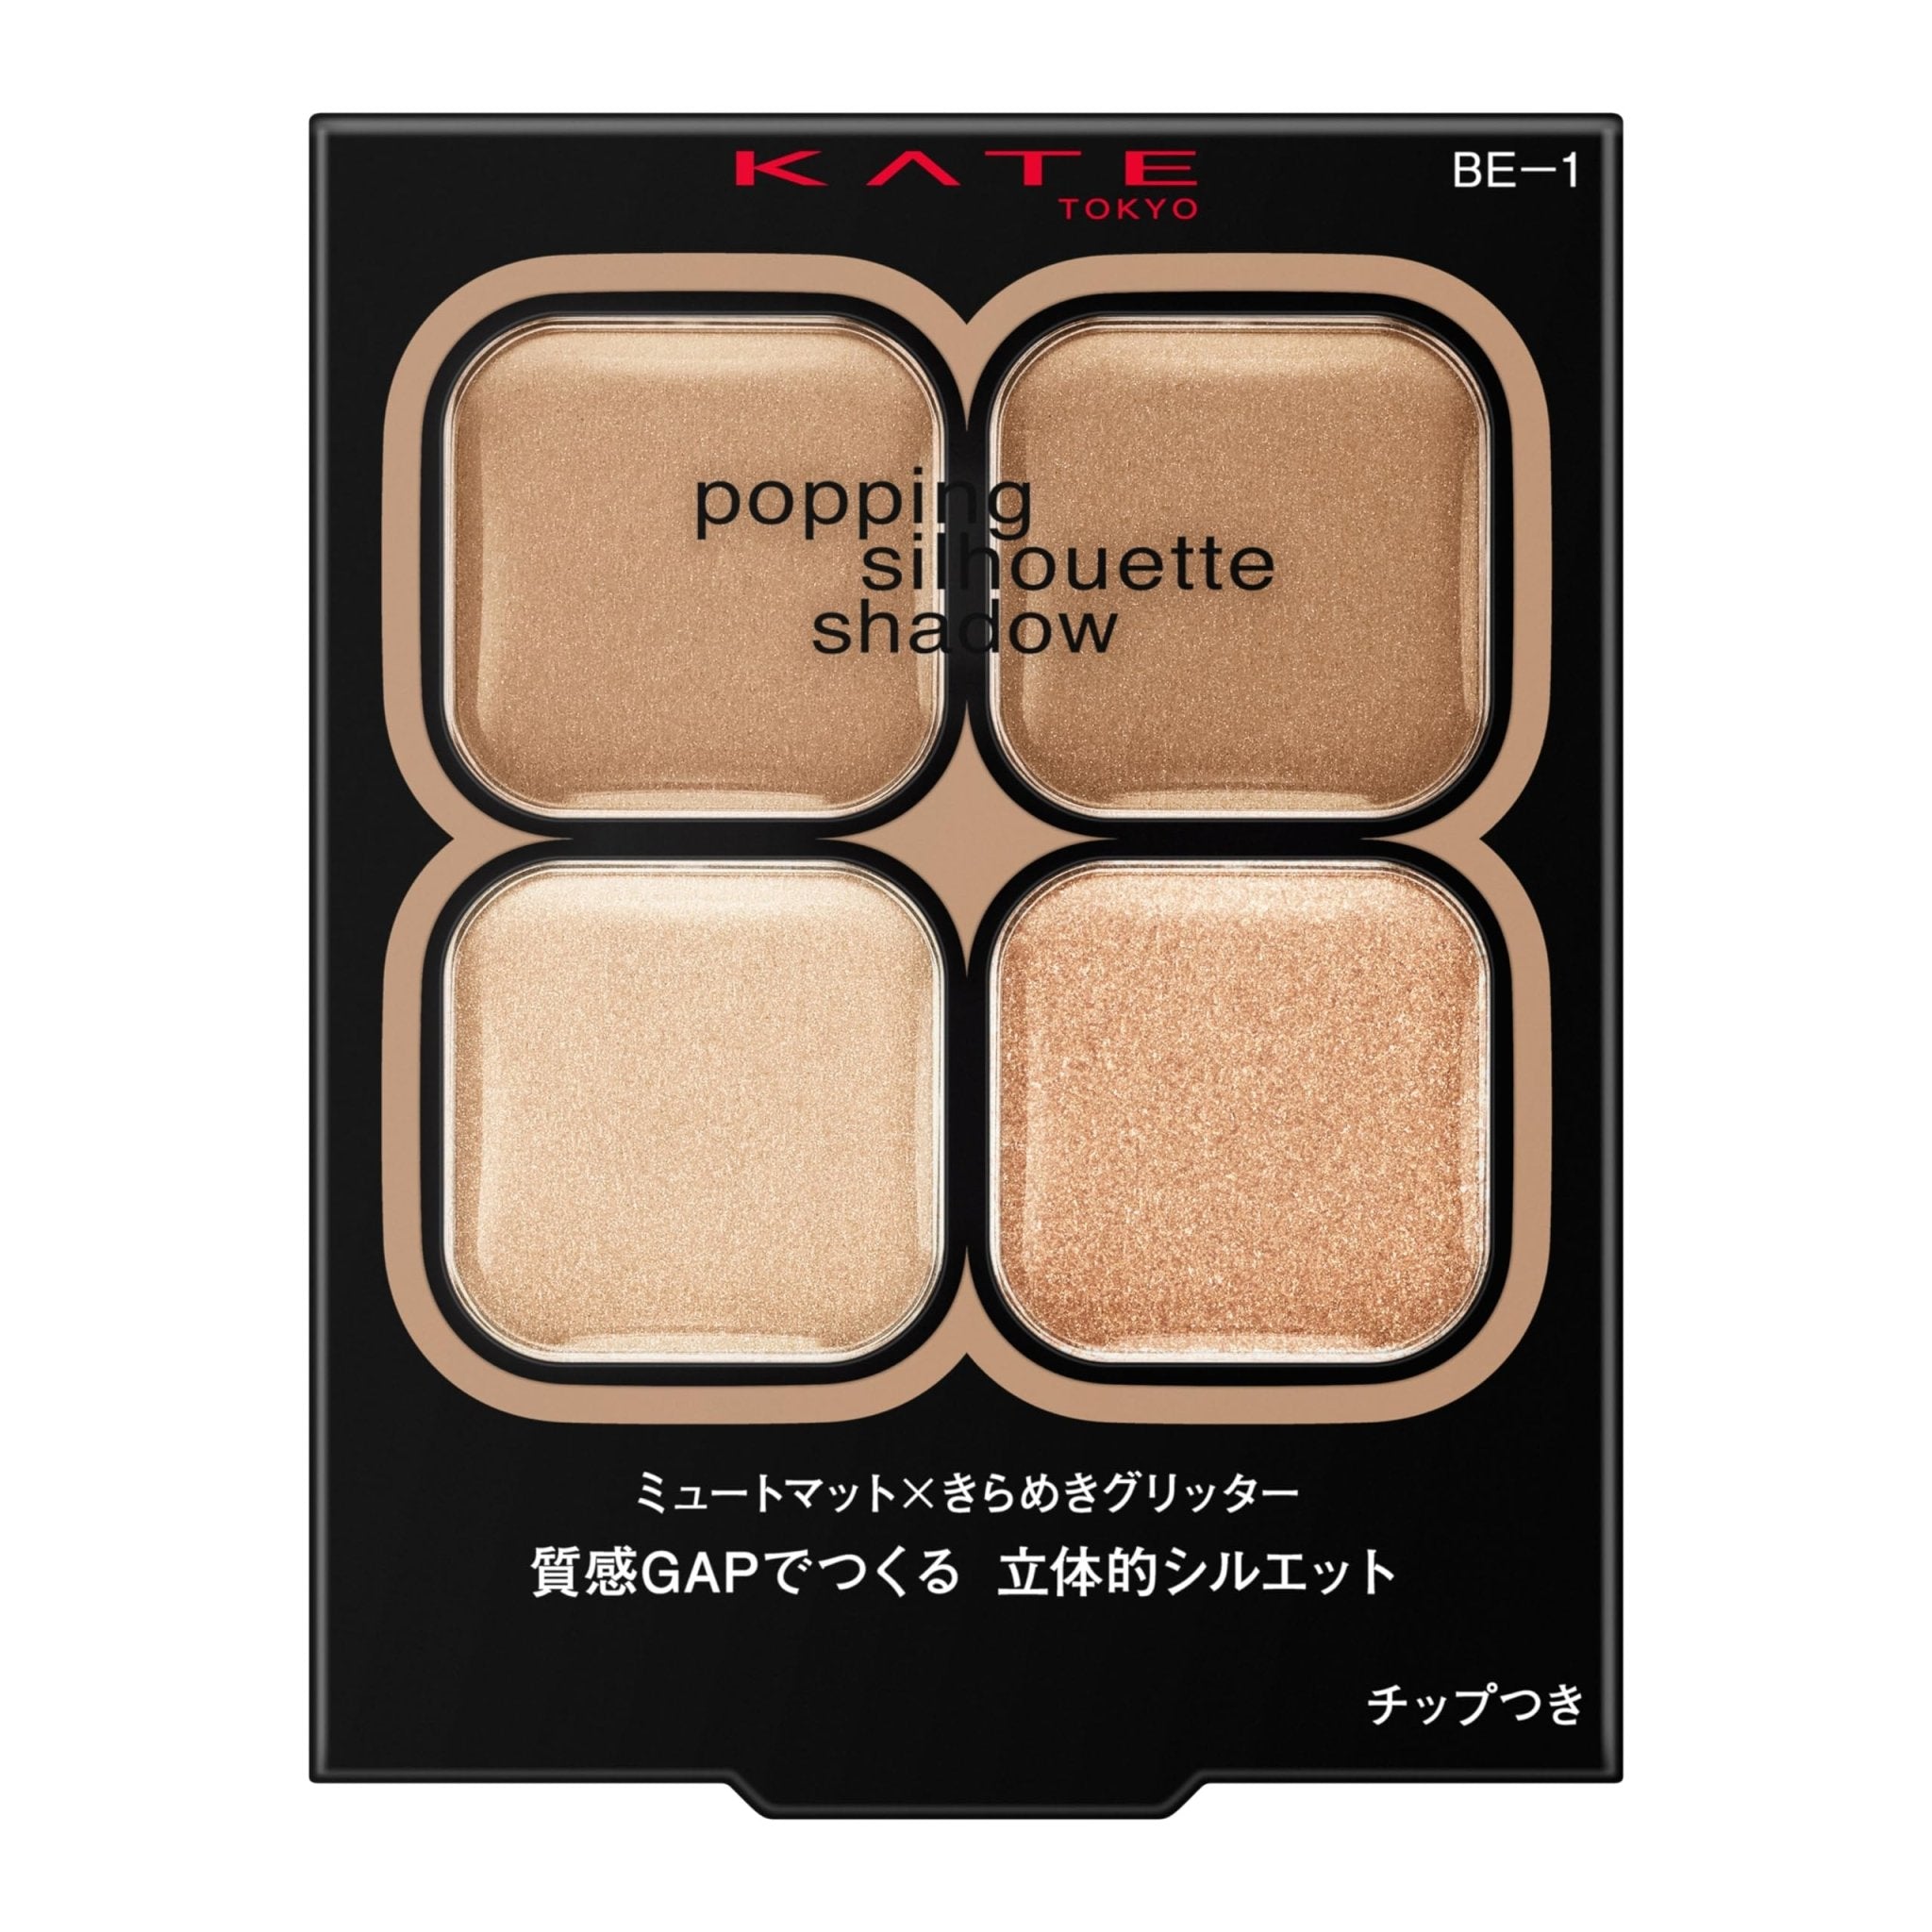 Kate Popping Silhouette Shadow Be - 1 High - Quality Makeup Product